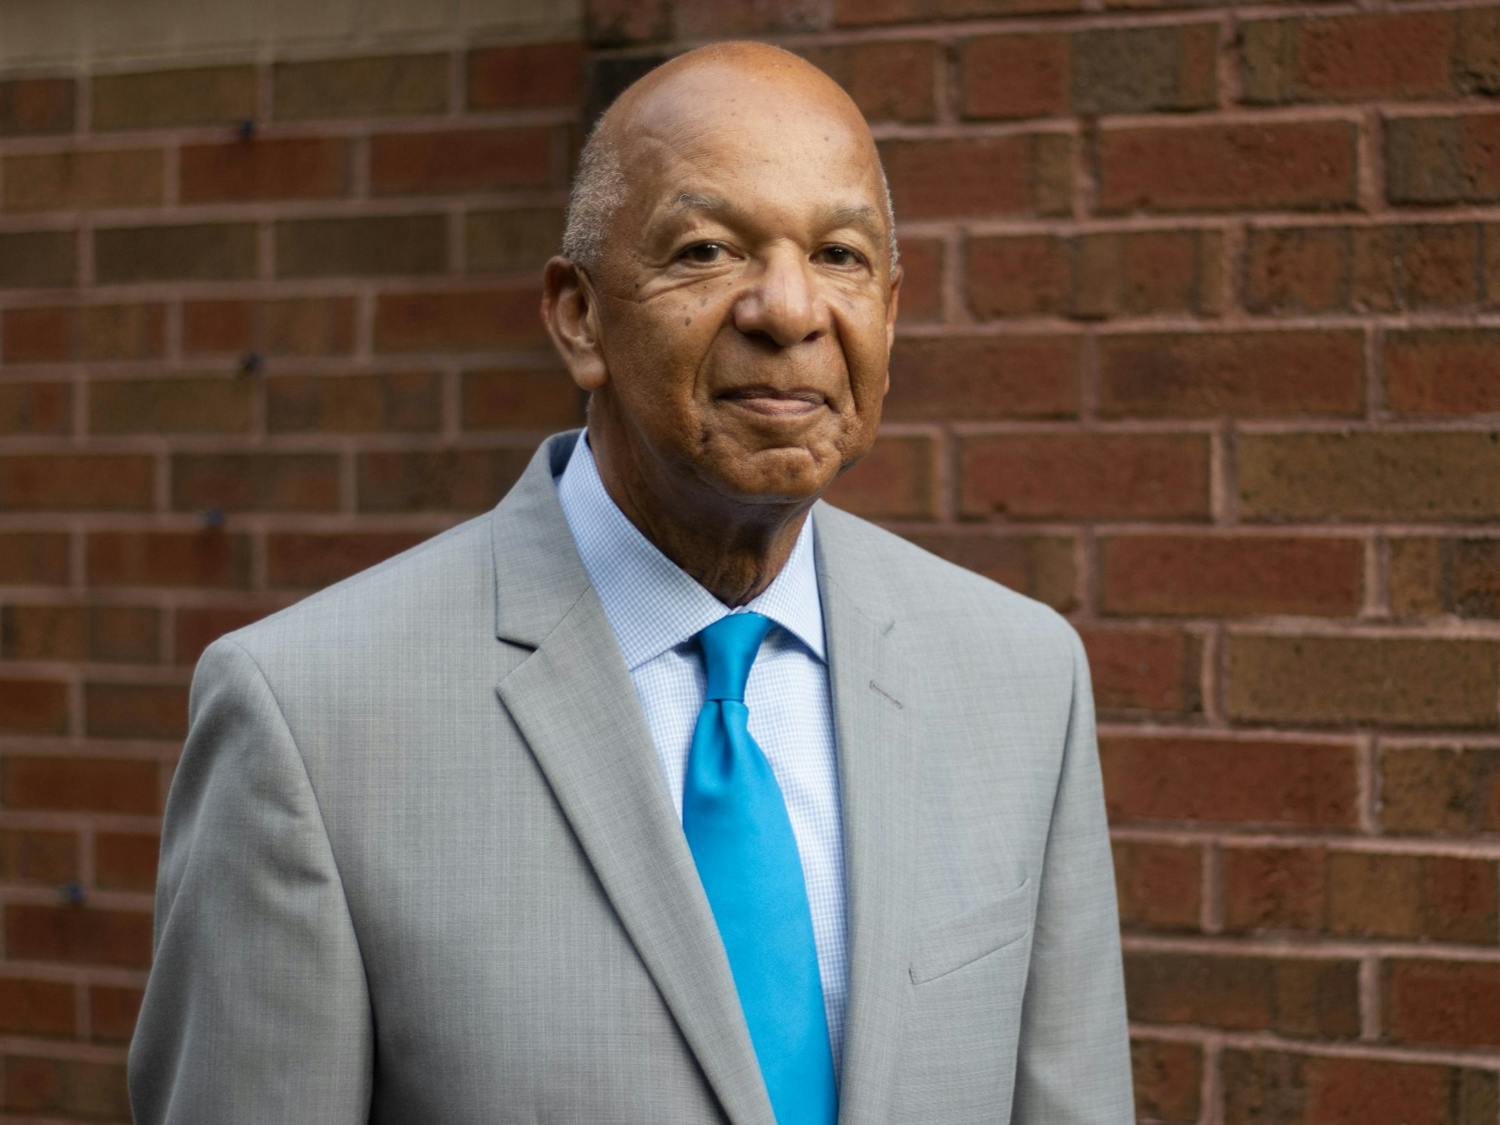 Stan Vickers was the first Black student to attend a previously all-white school in Orange County. Vickers was honored by the Chapel Hill-Carrboro City Schools Board of Education on August 12 60 years after the court case that desegregated local schools.